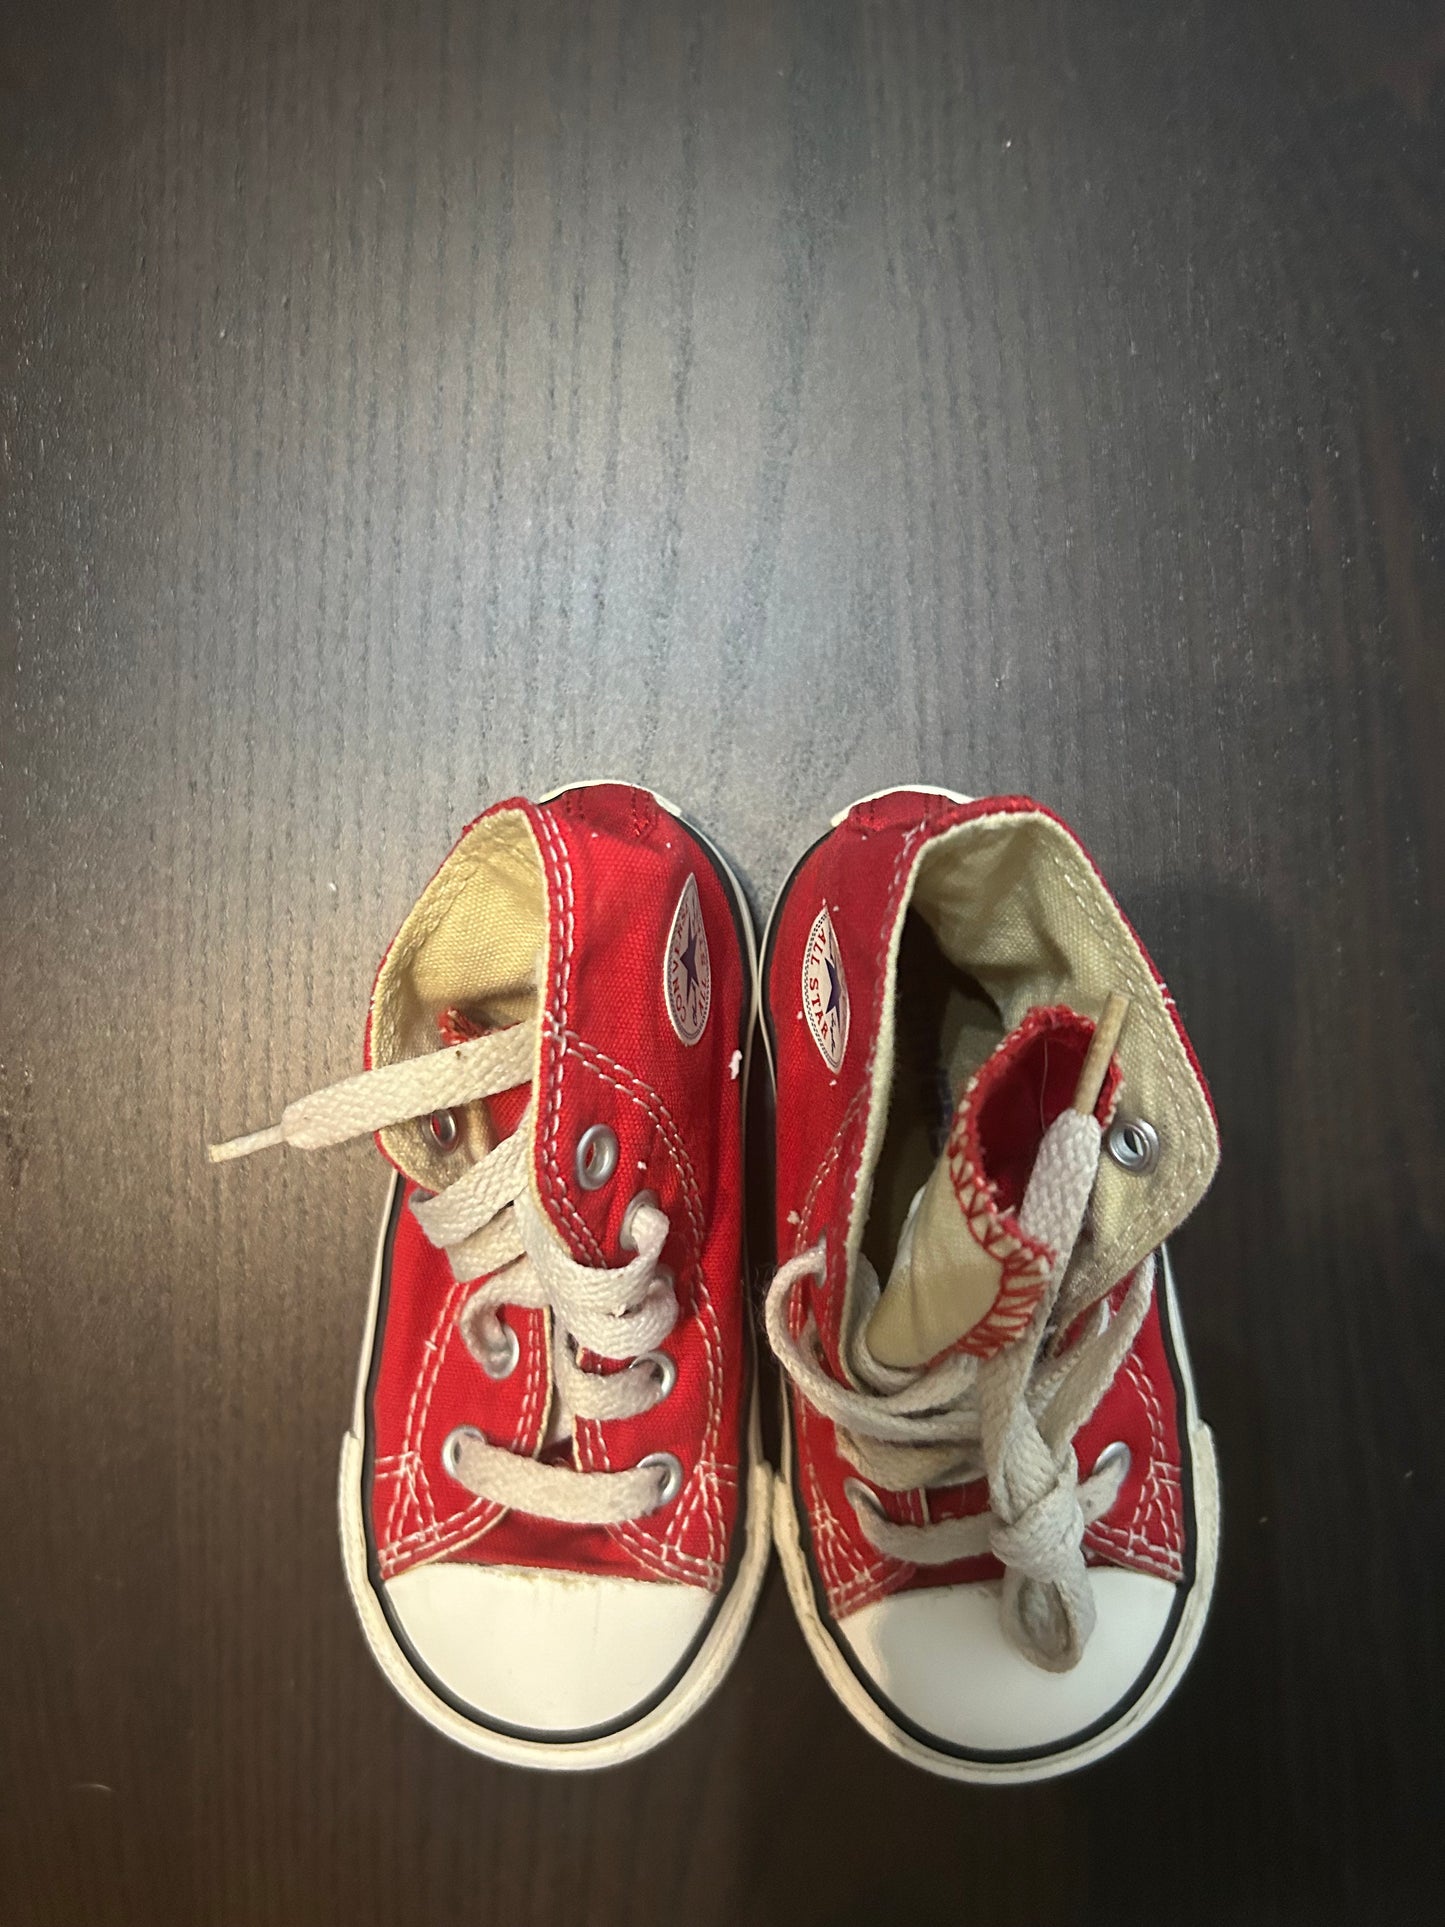 Red converse high tops little kid size 6 45224